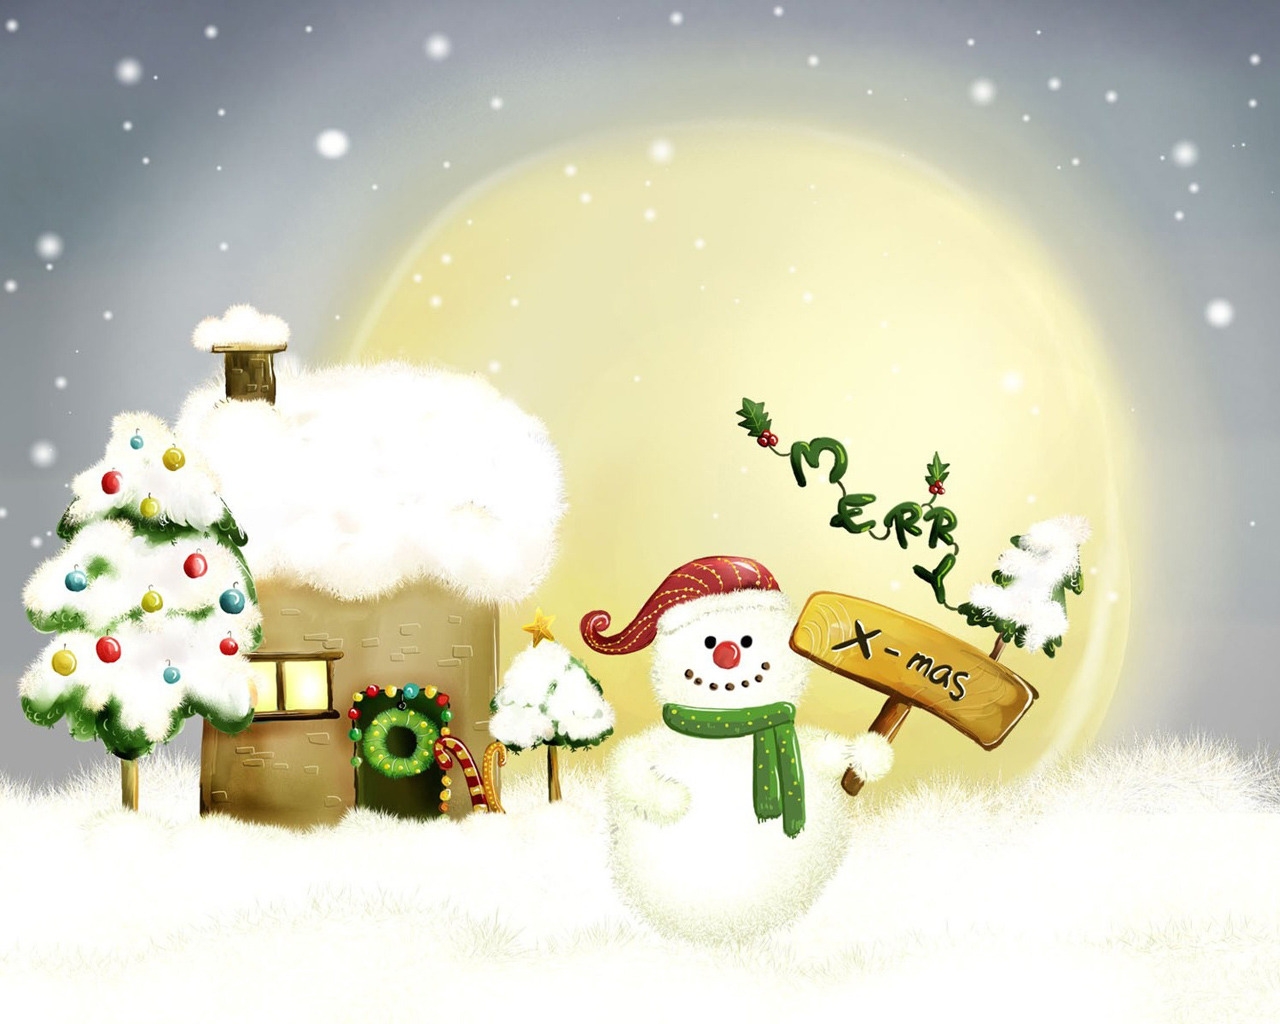 Merry Christmas for 1280 x 1024 resolution